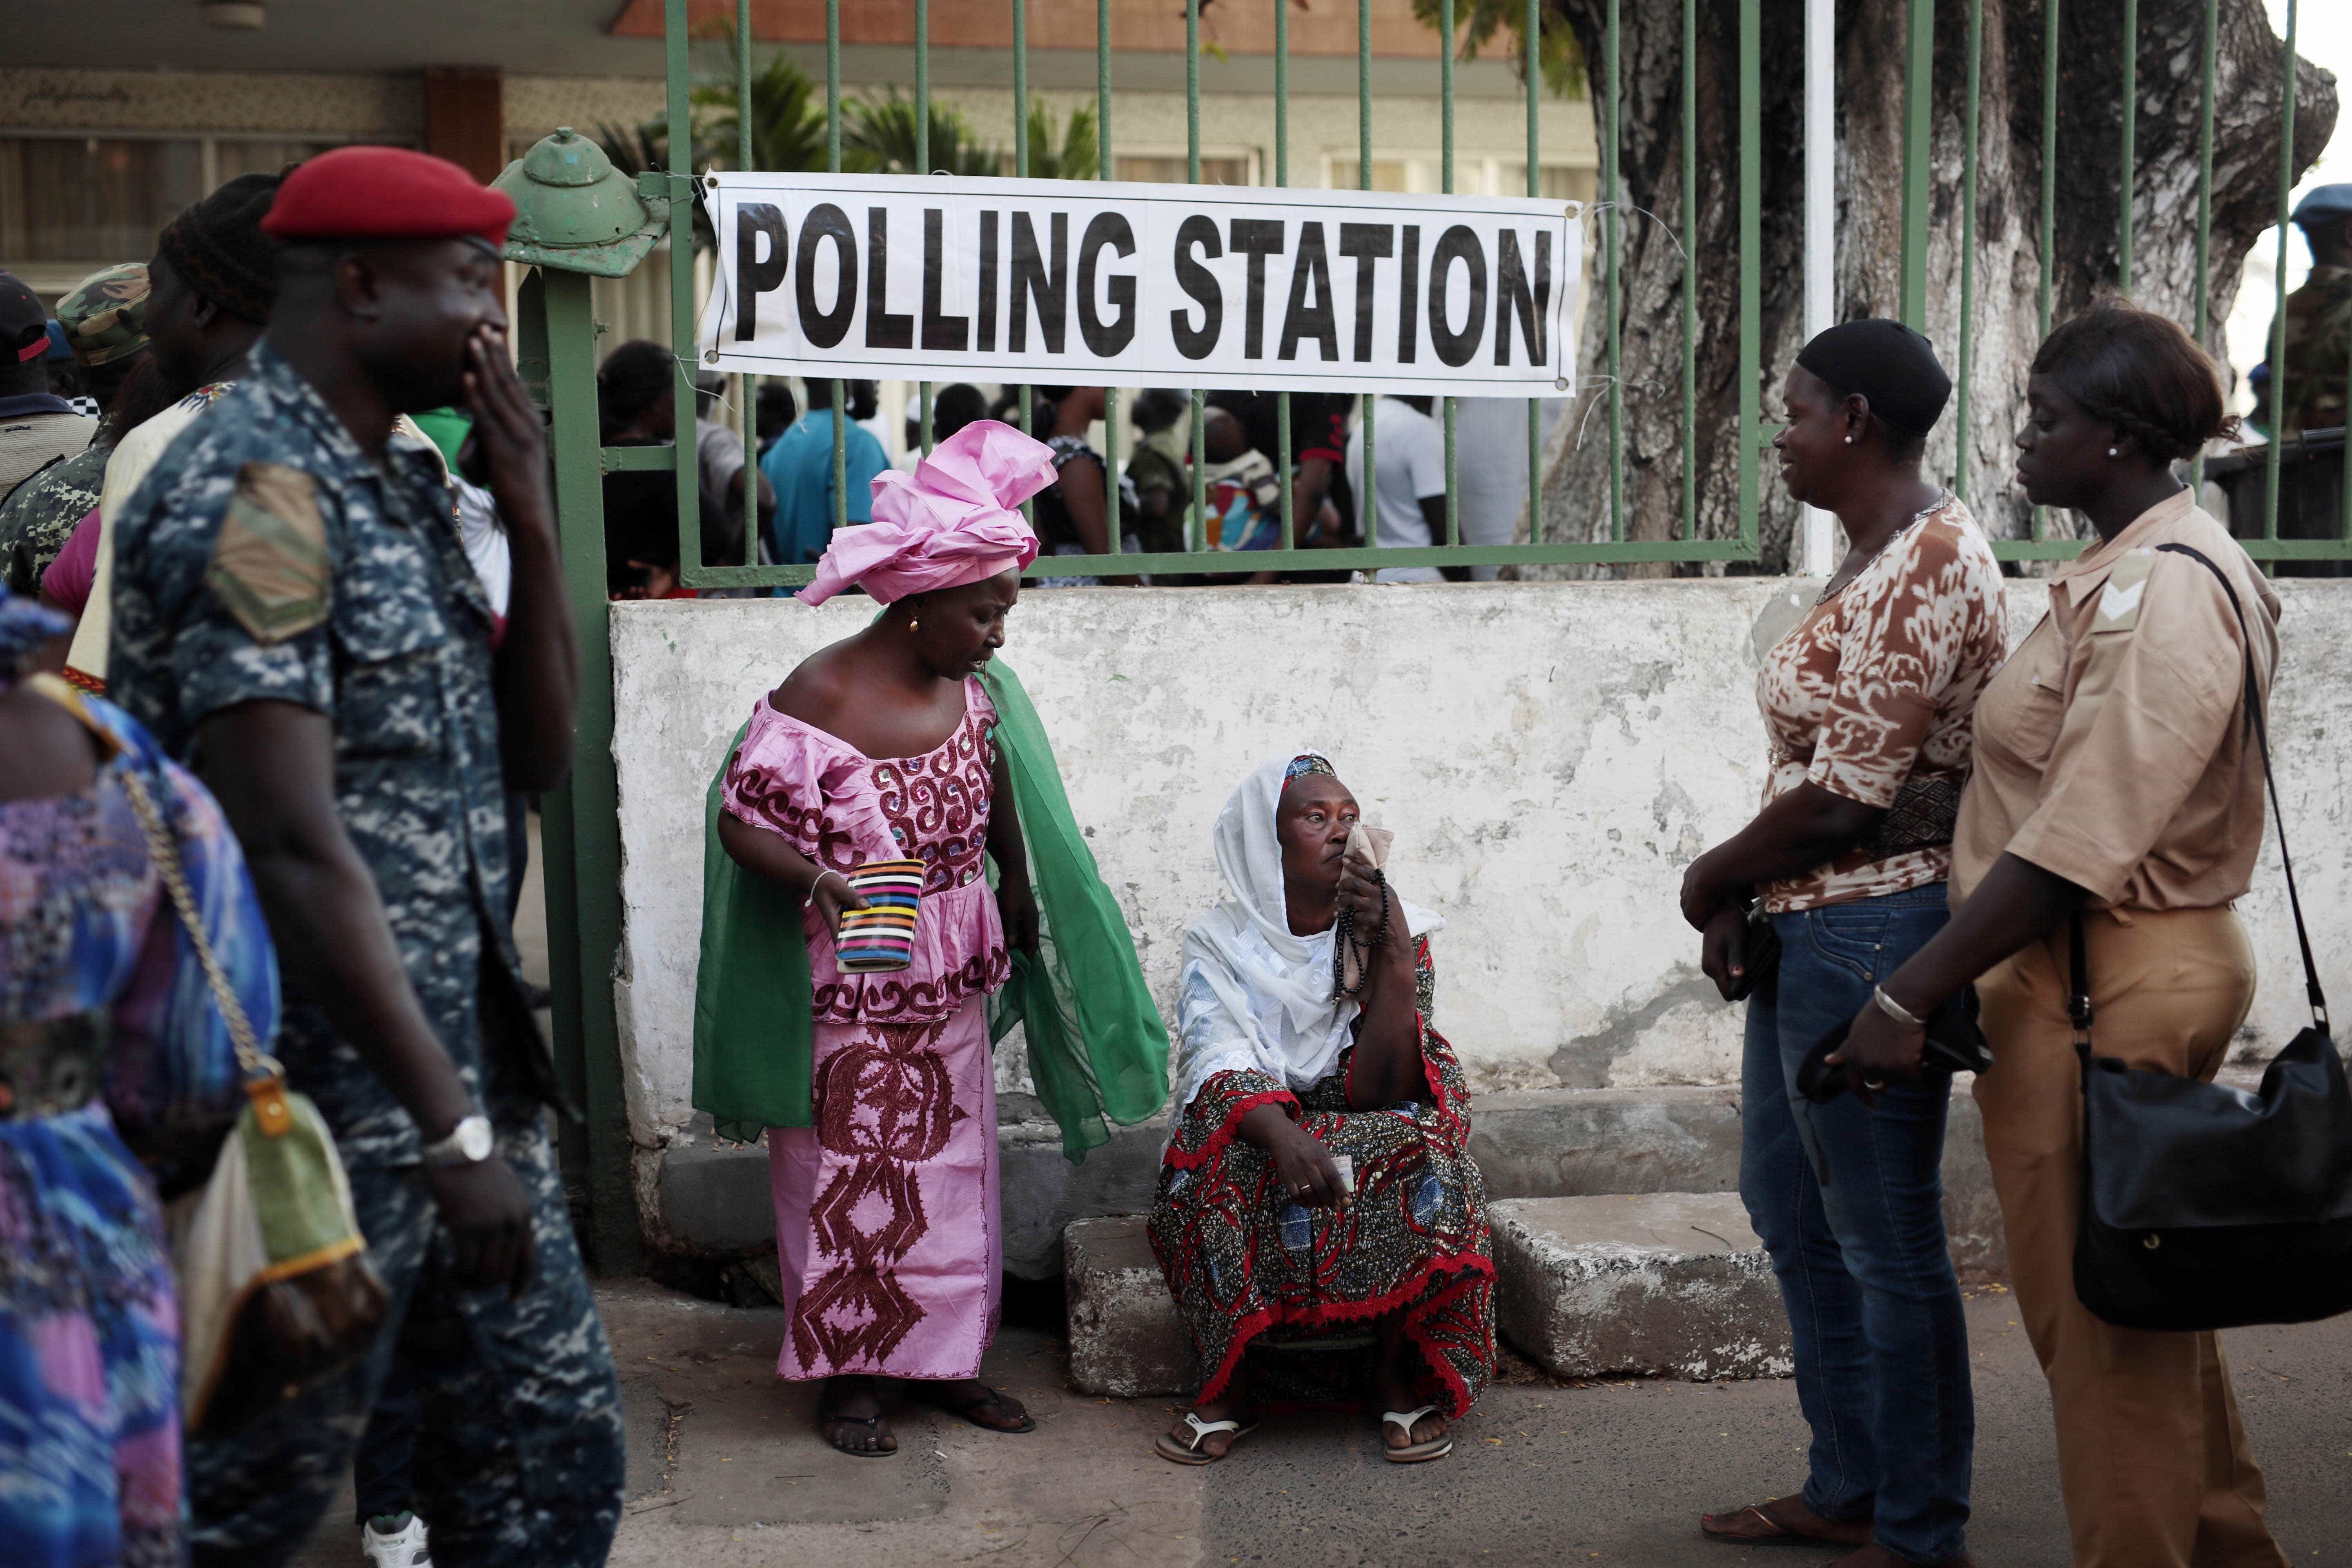 Gambians wait to cast their vote at a polling station in Banjul, Gambia, on 1 December 2016, AP Photo/Jerome Delay